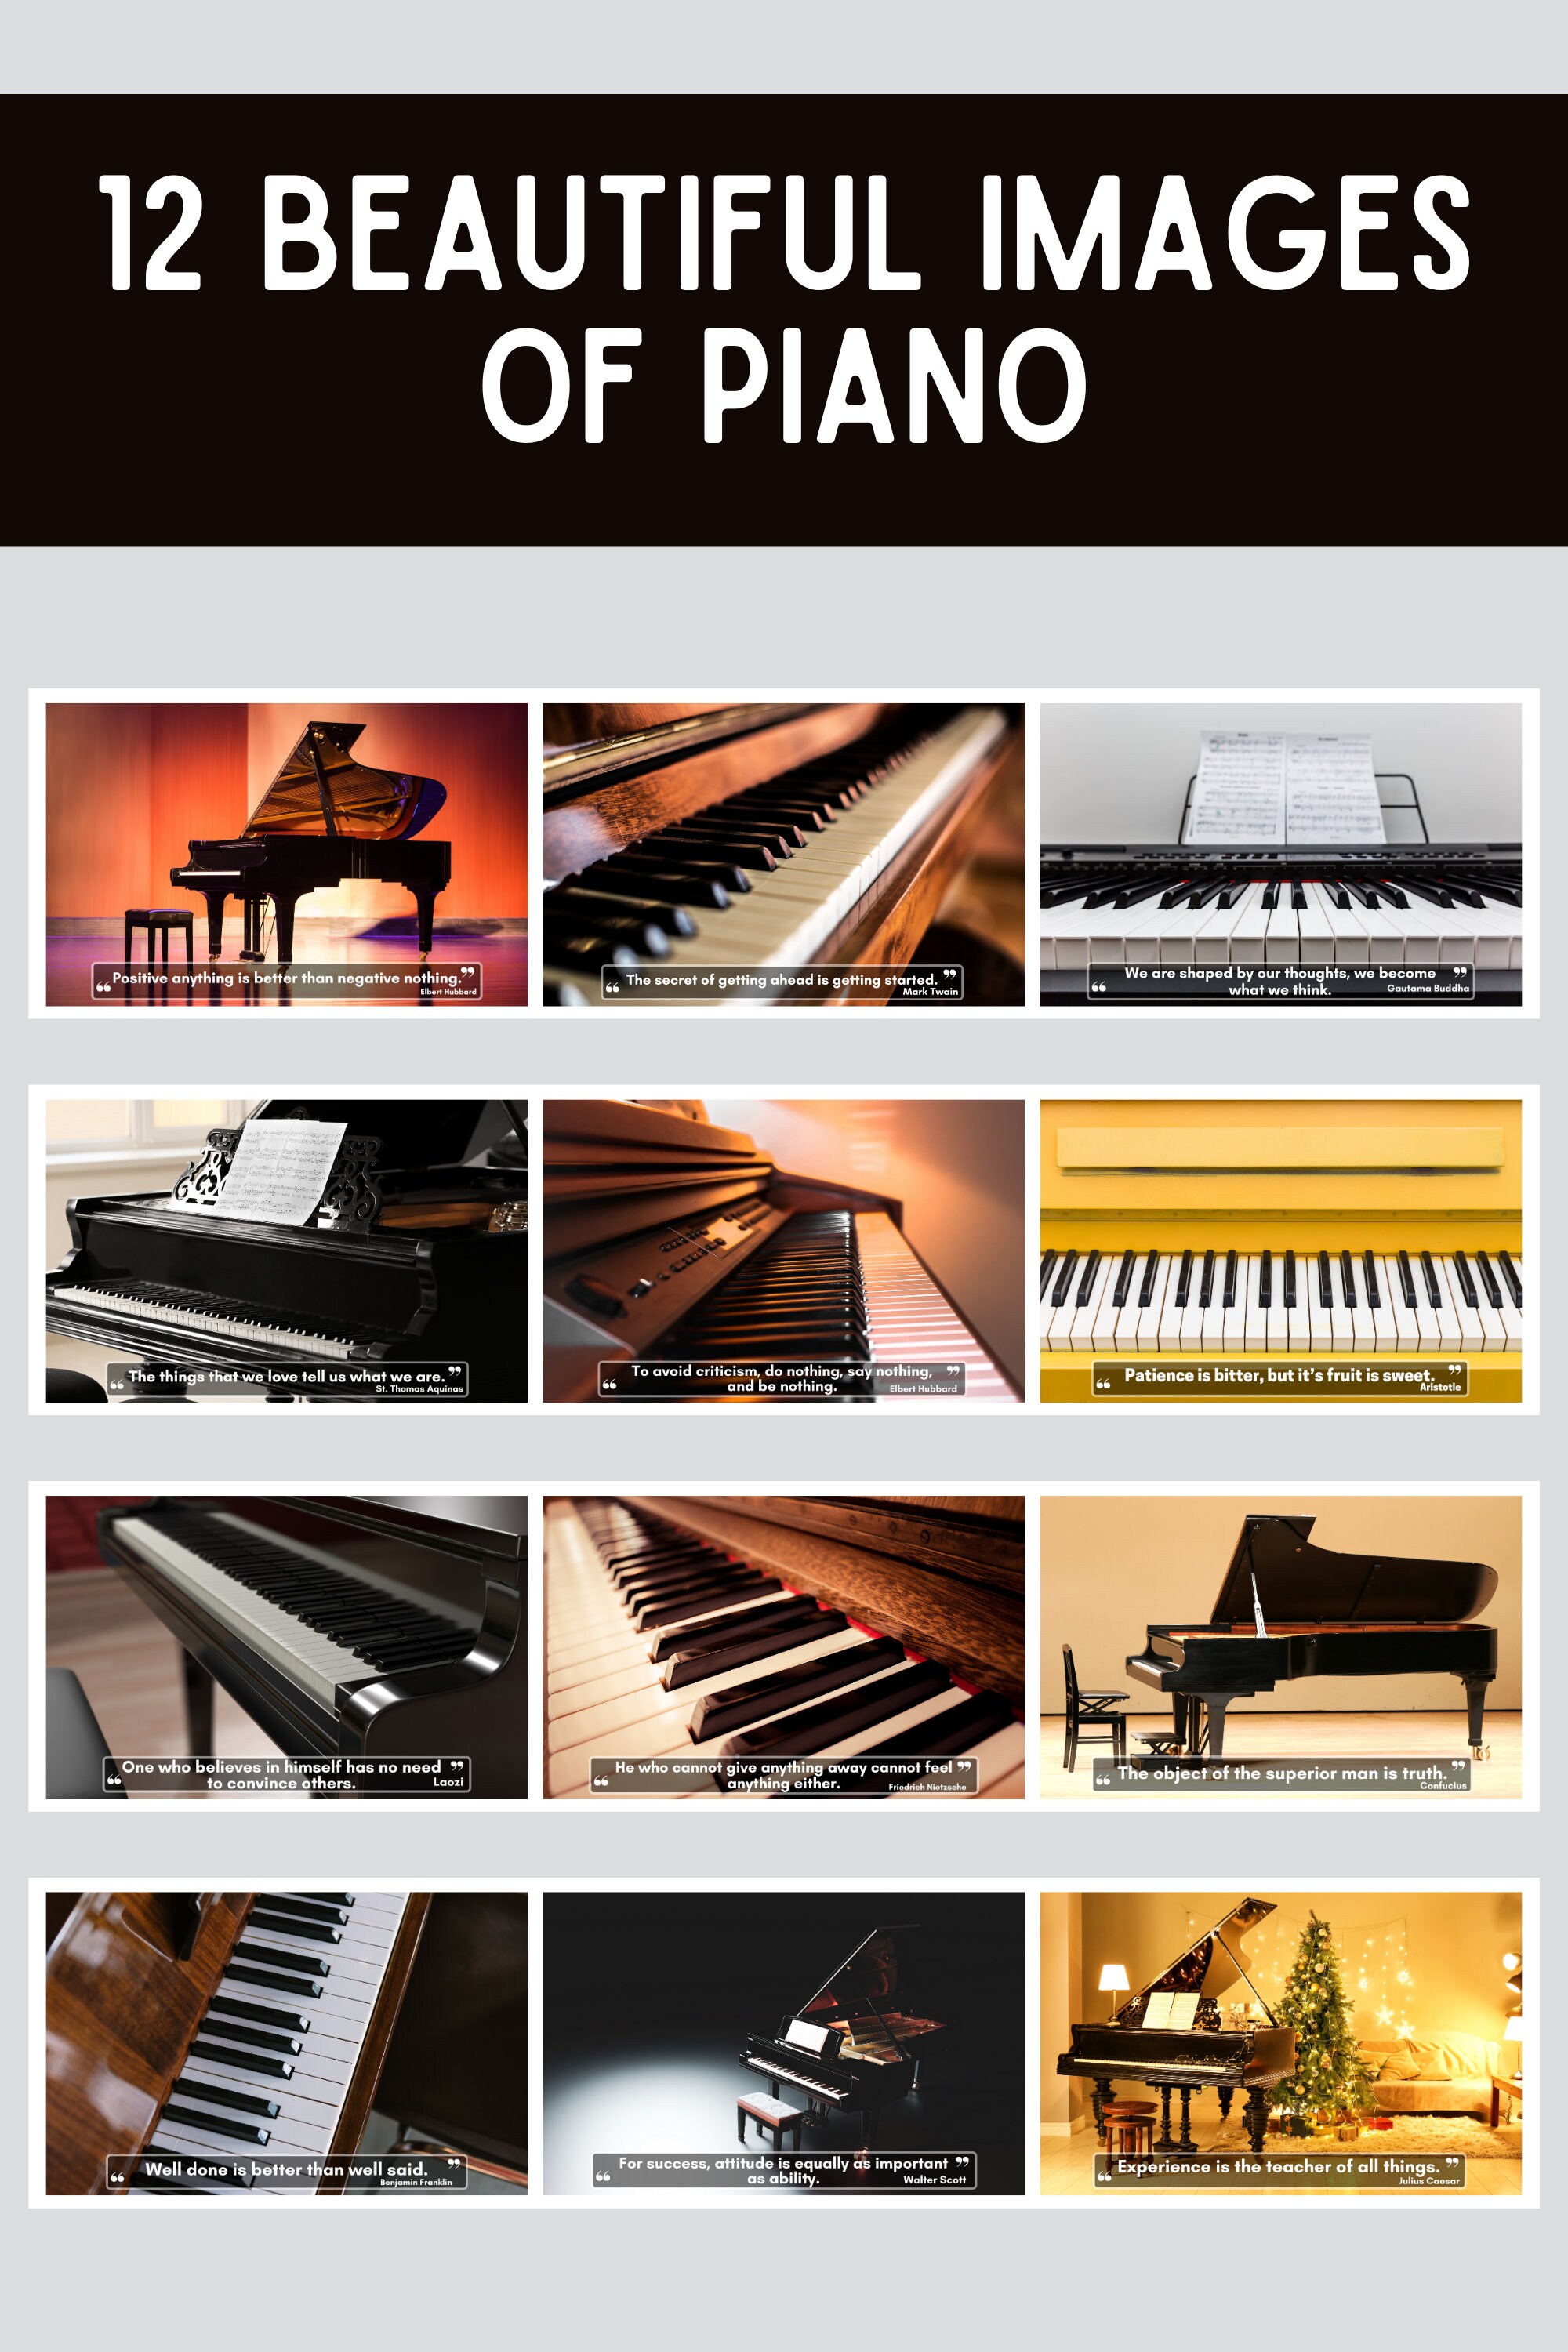 Piano Wall Calendar 2024, Great Gift Idea for Piano Lovers 